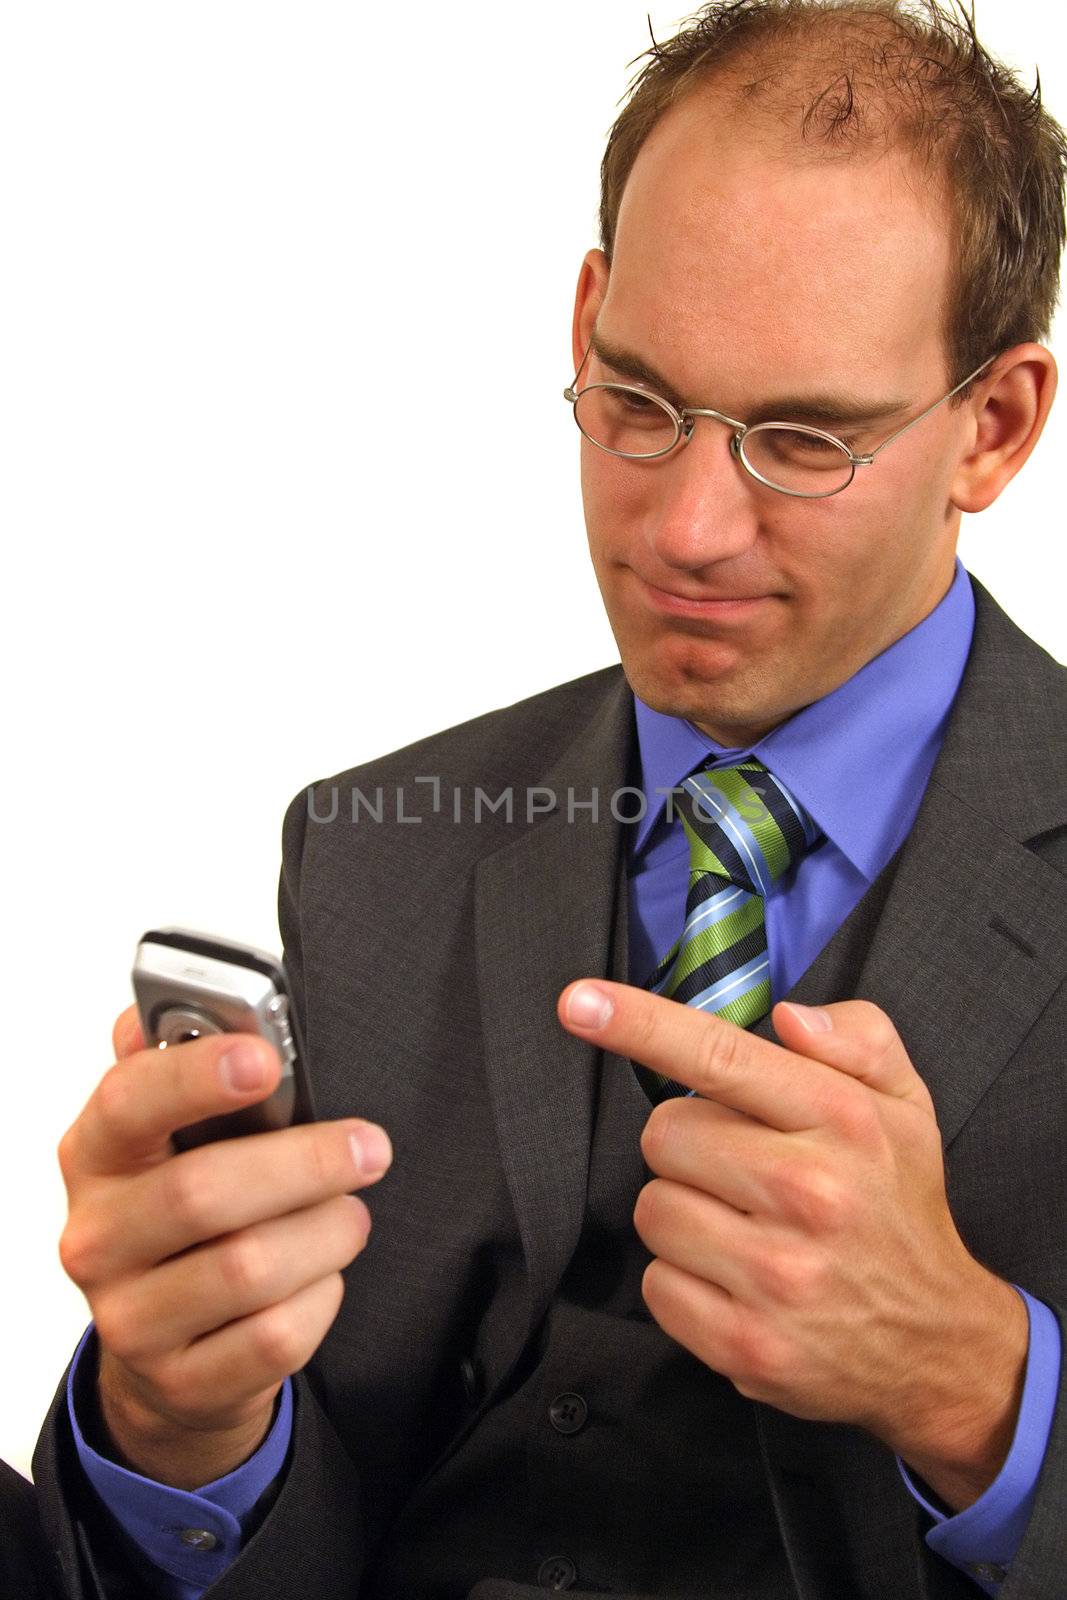 A smarting businessman gets bad news via his mobile phone. All isolated on white background.